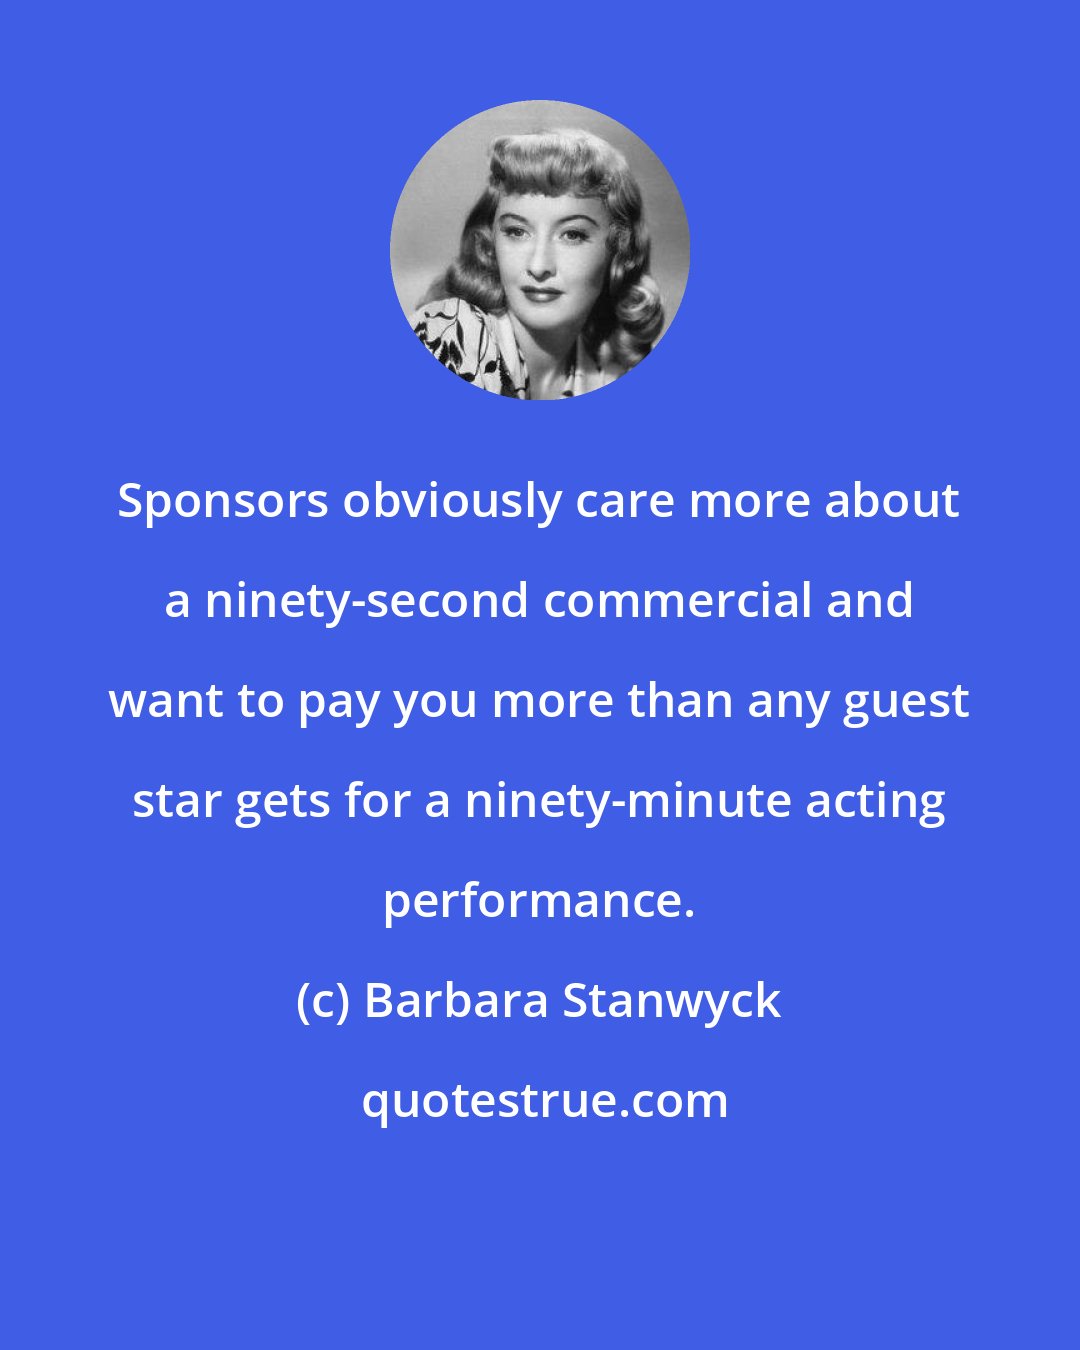 Barbara Stanwyck: Sponsors obviously care more about a ninety-second commercial and want to pay you more than any guest star gets for a ninety-minute acting performance.